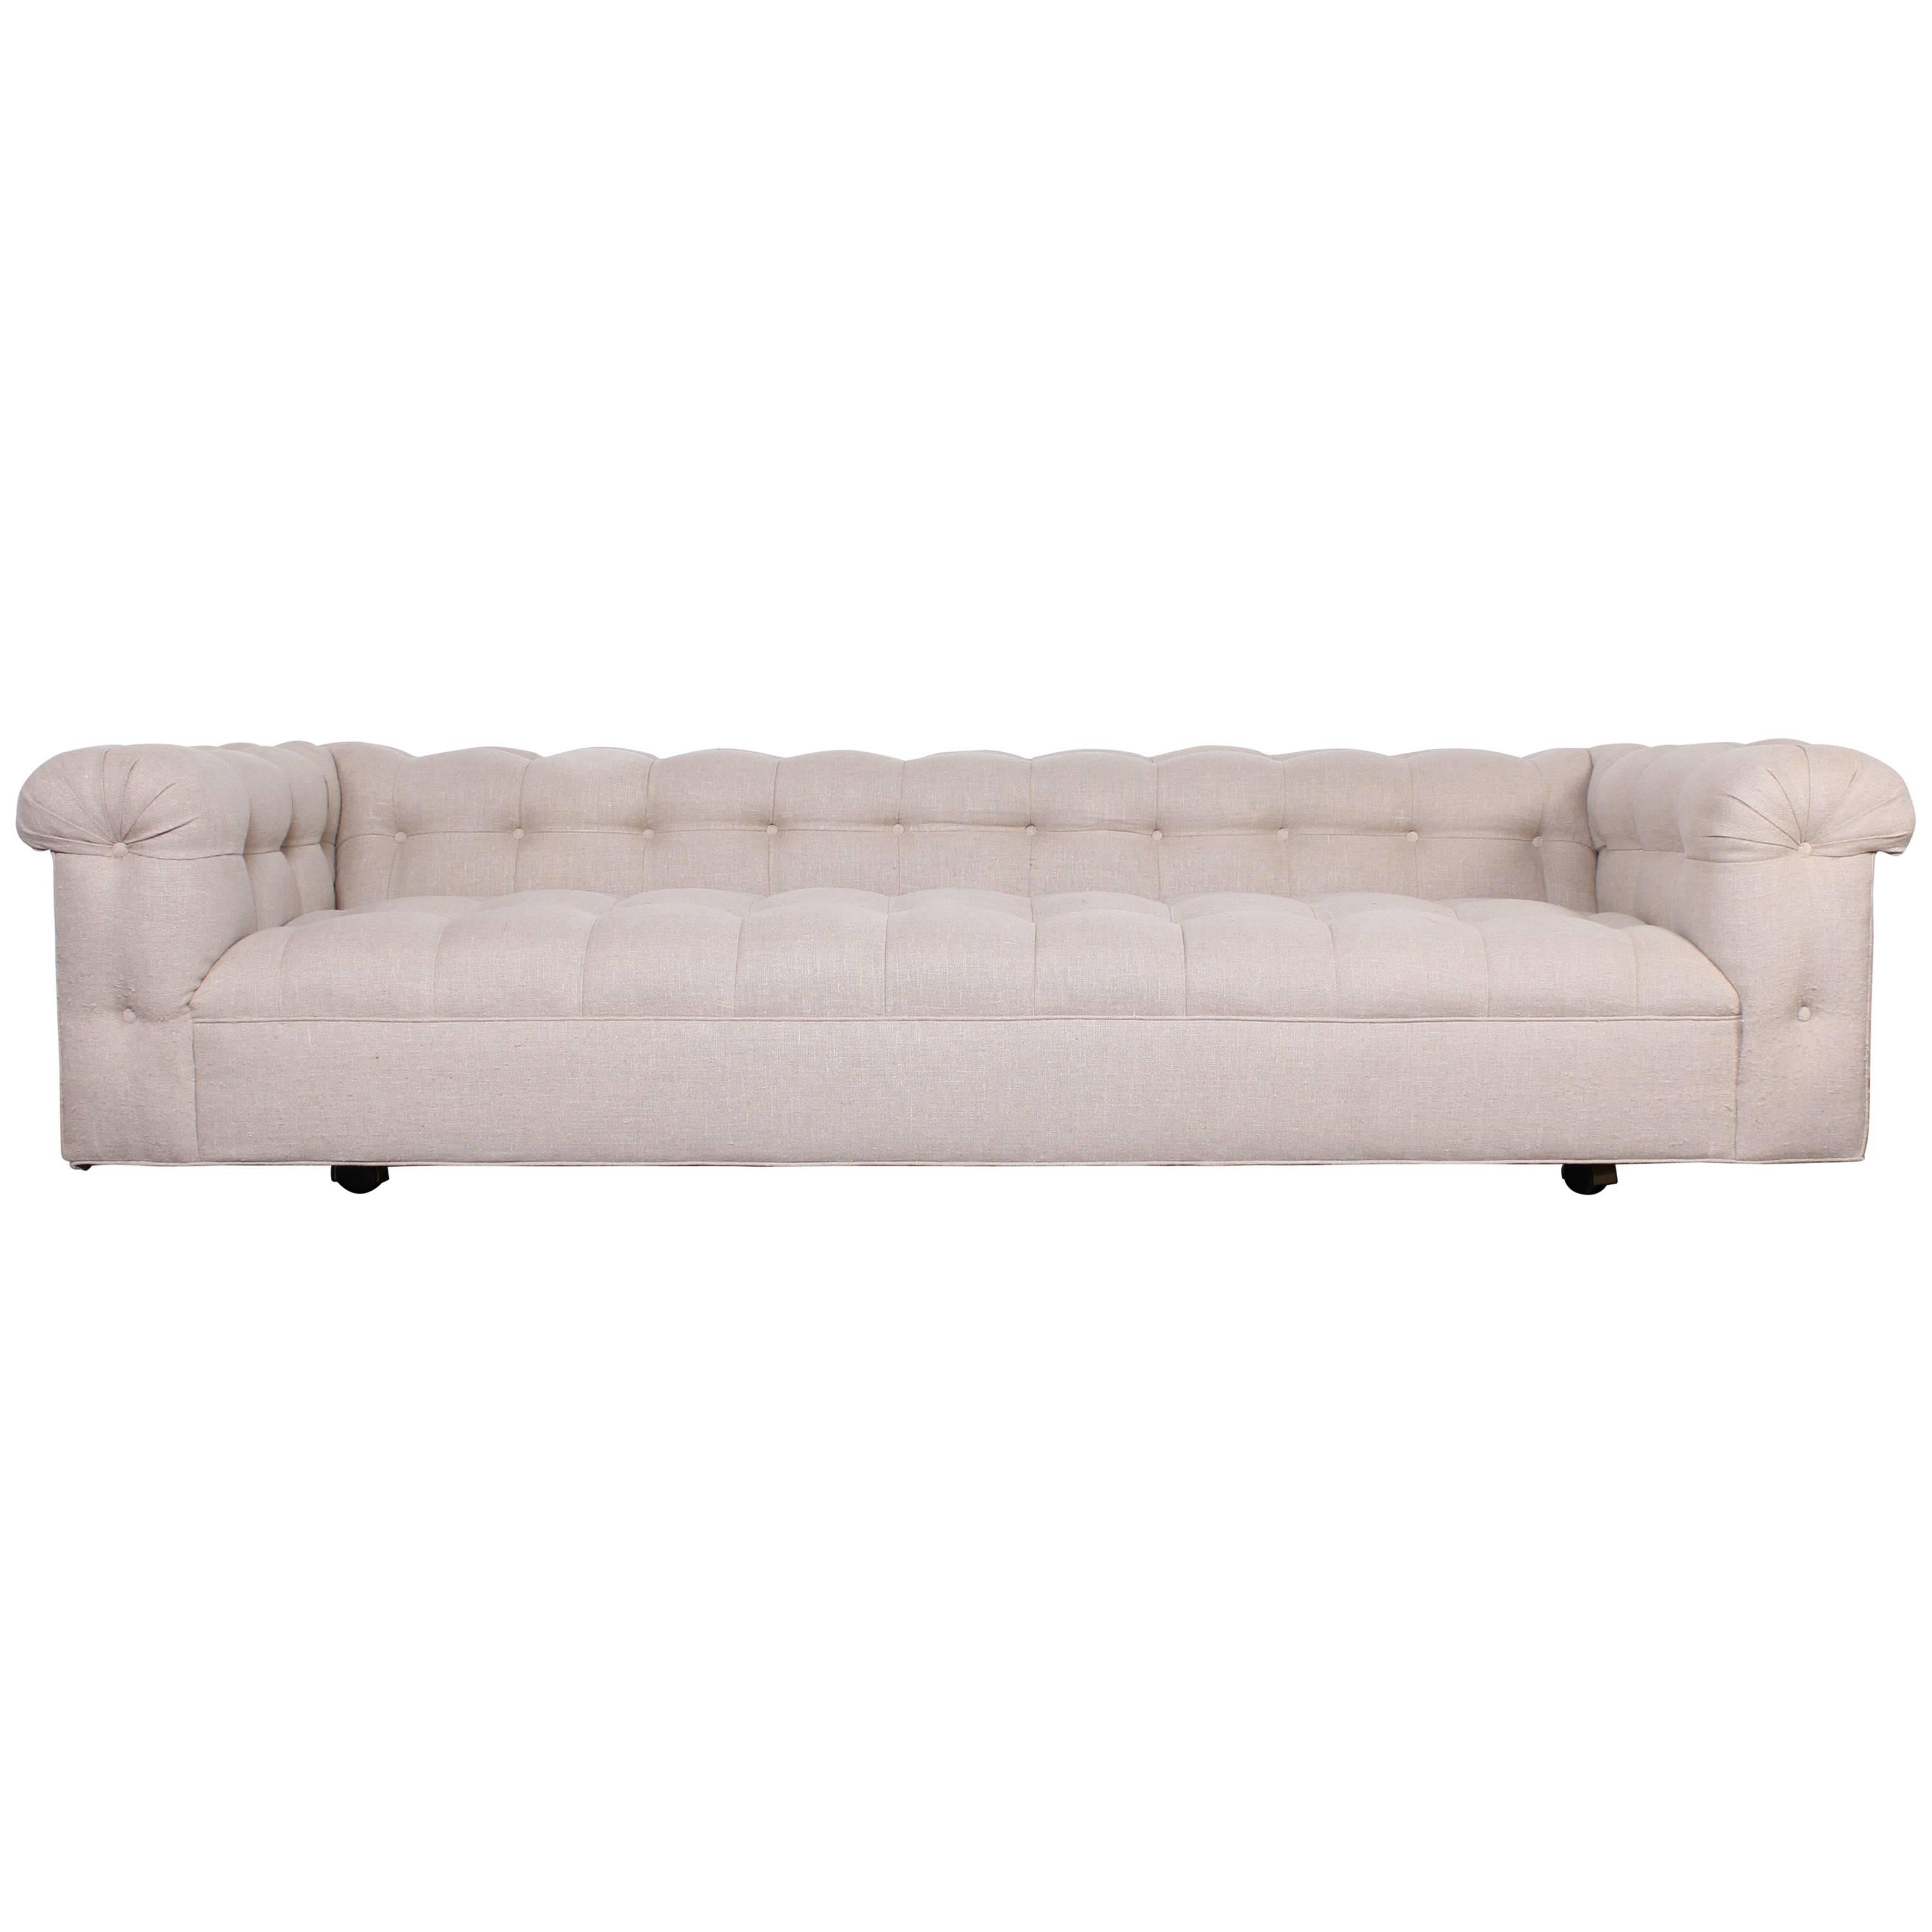 Party Sofa Designed by Edward Wormley for Dunbar  ( pair available )